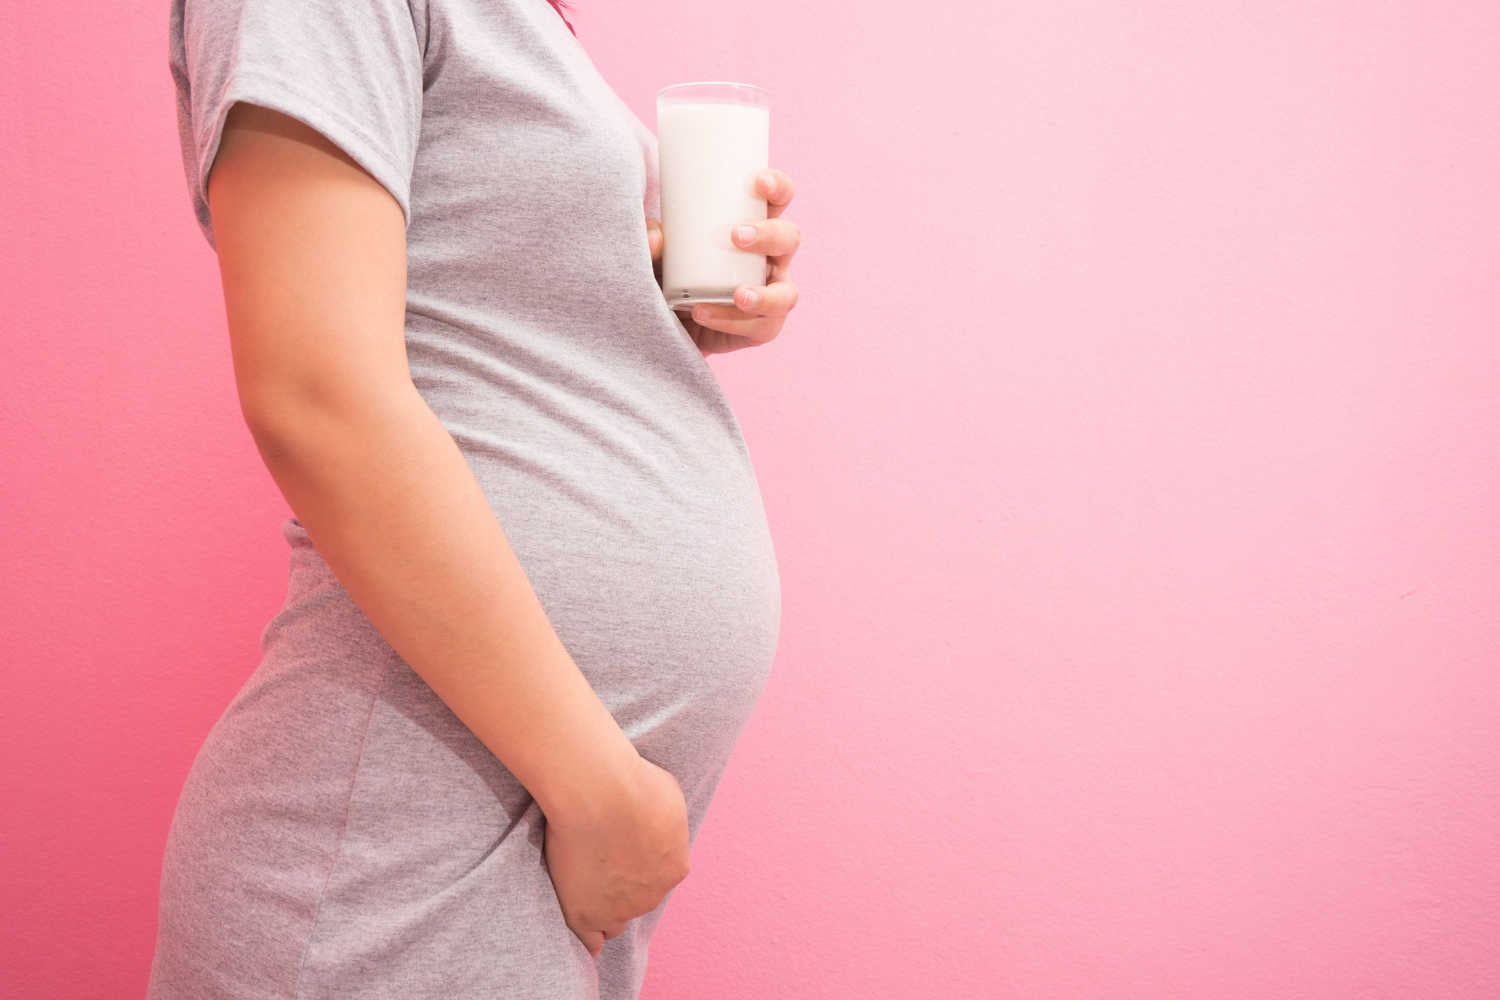 Pregnant woman holding a nutritional drink glass